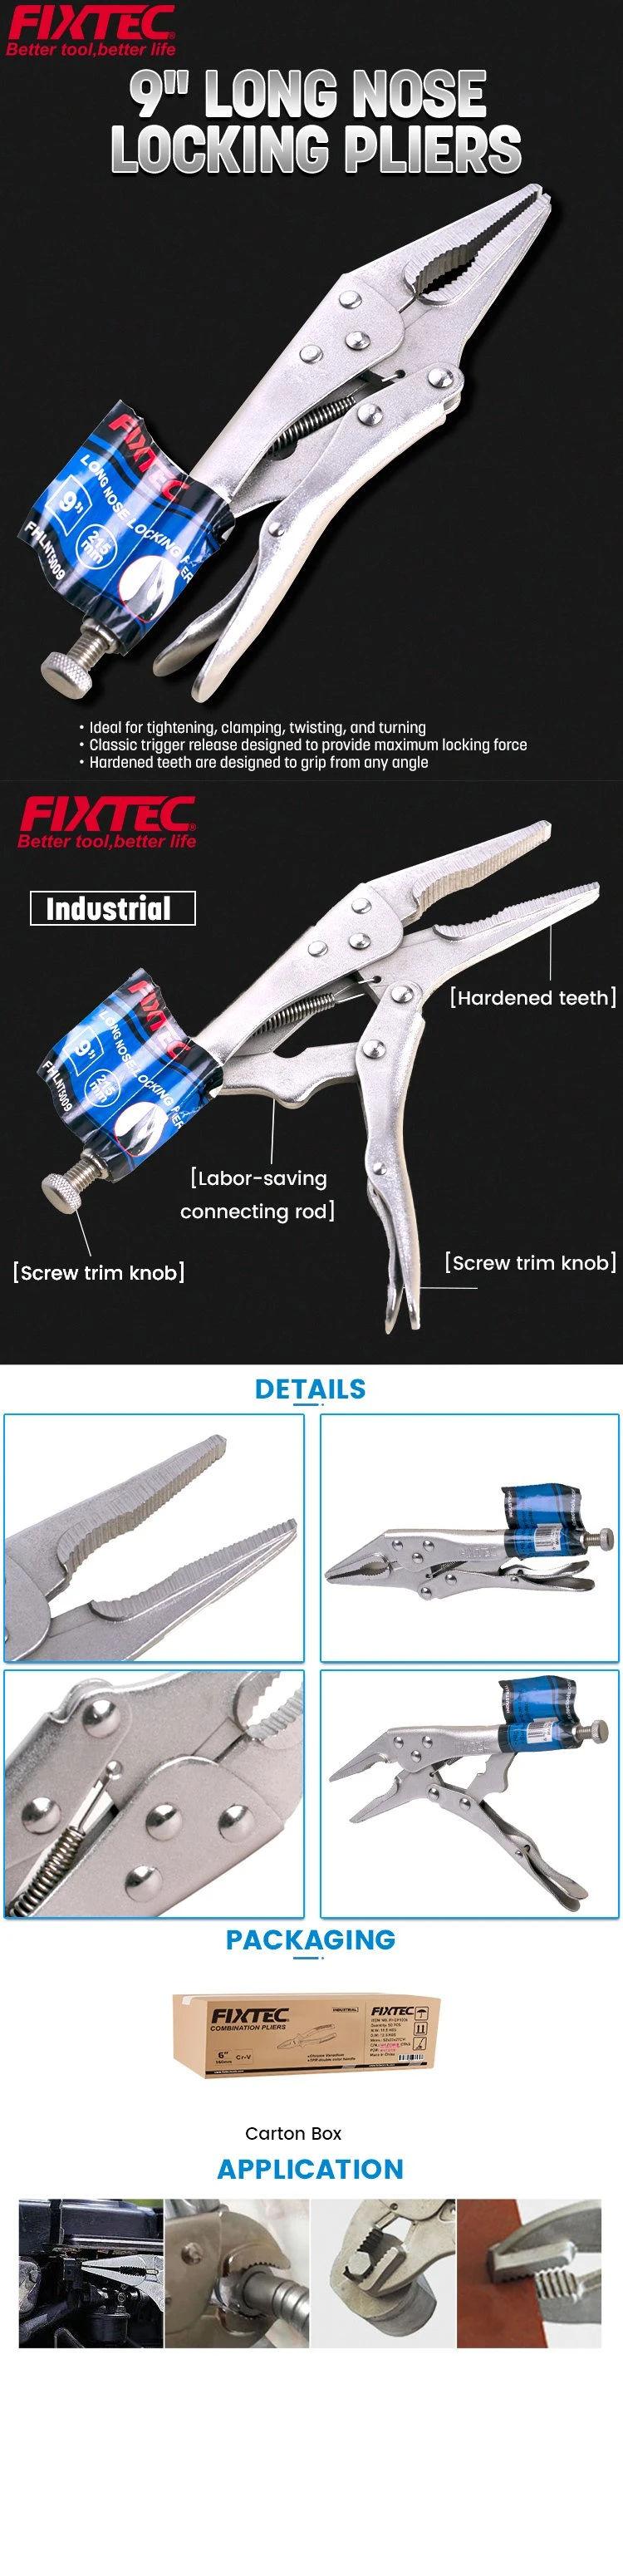 Fixtec Hand Tools Carbon Steel 9inch Long Nose Mole Locking Vice Grips Lock Grip Clamp Locking Pliers